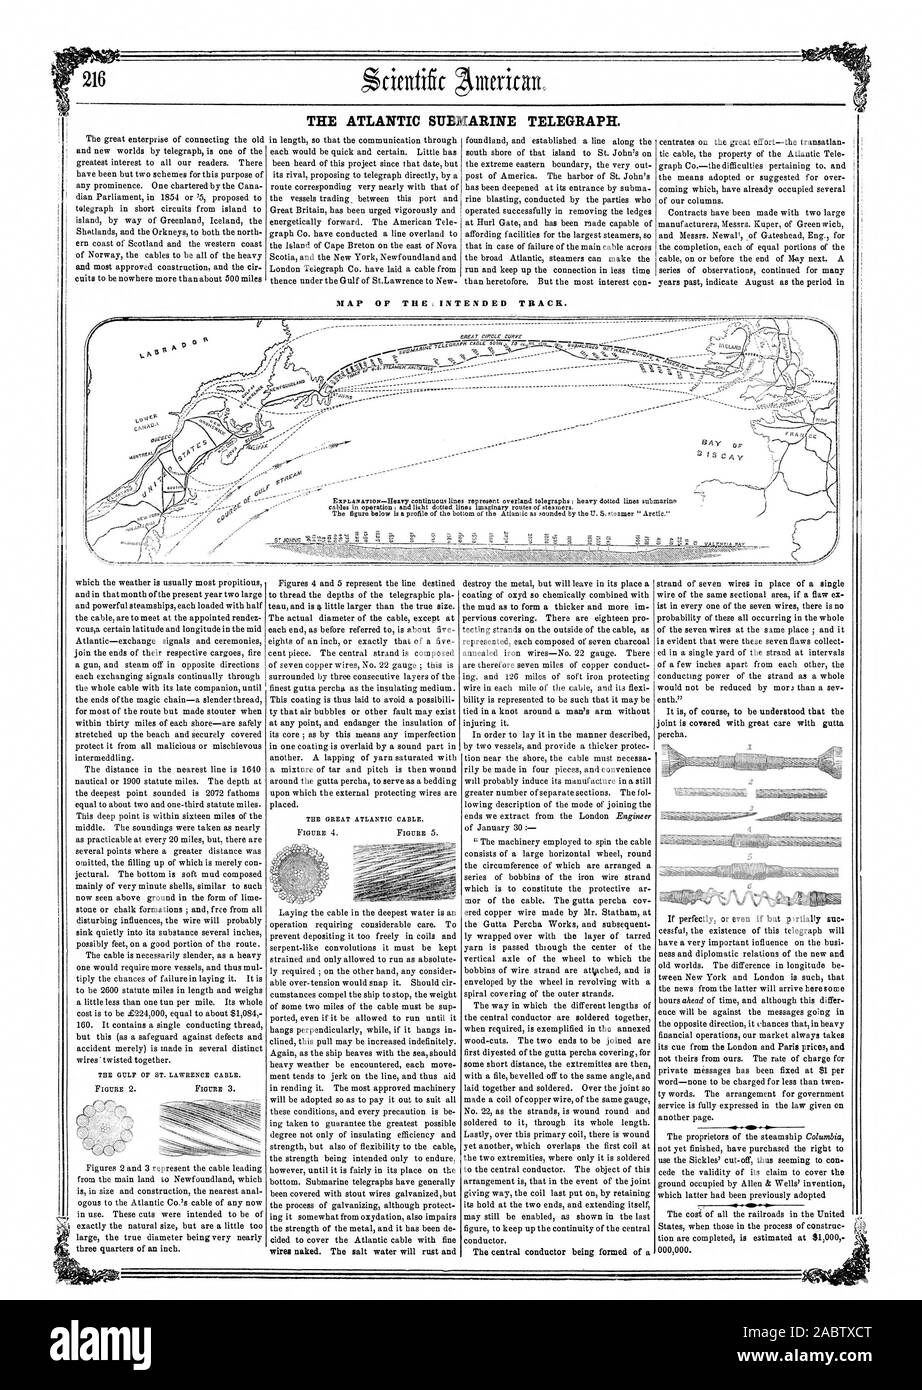 THE ATLANTIC SUBMARINE TELEGRAPH. MAP OF THE INTENDED TRACK. BAY or, scientific american, 1857-03-14 Stock Photo